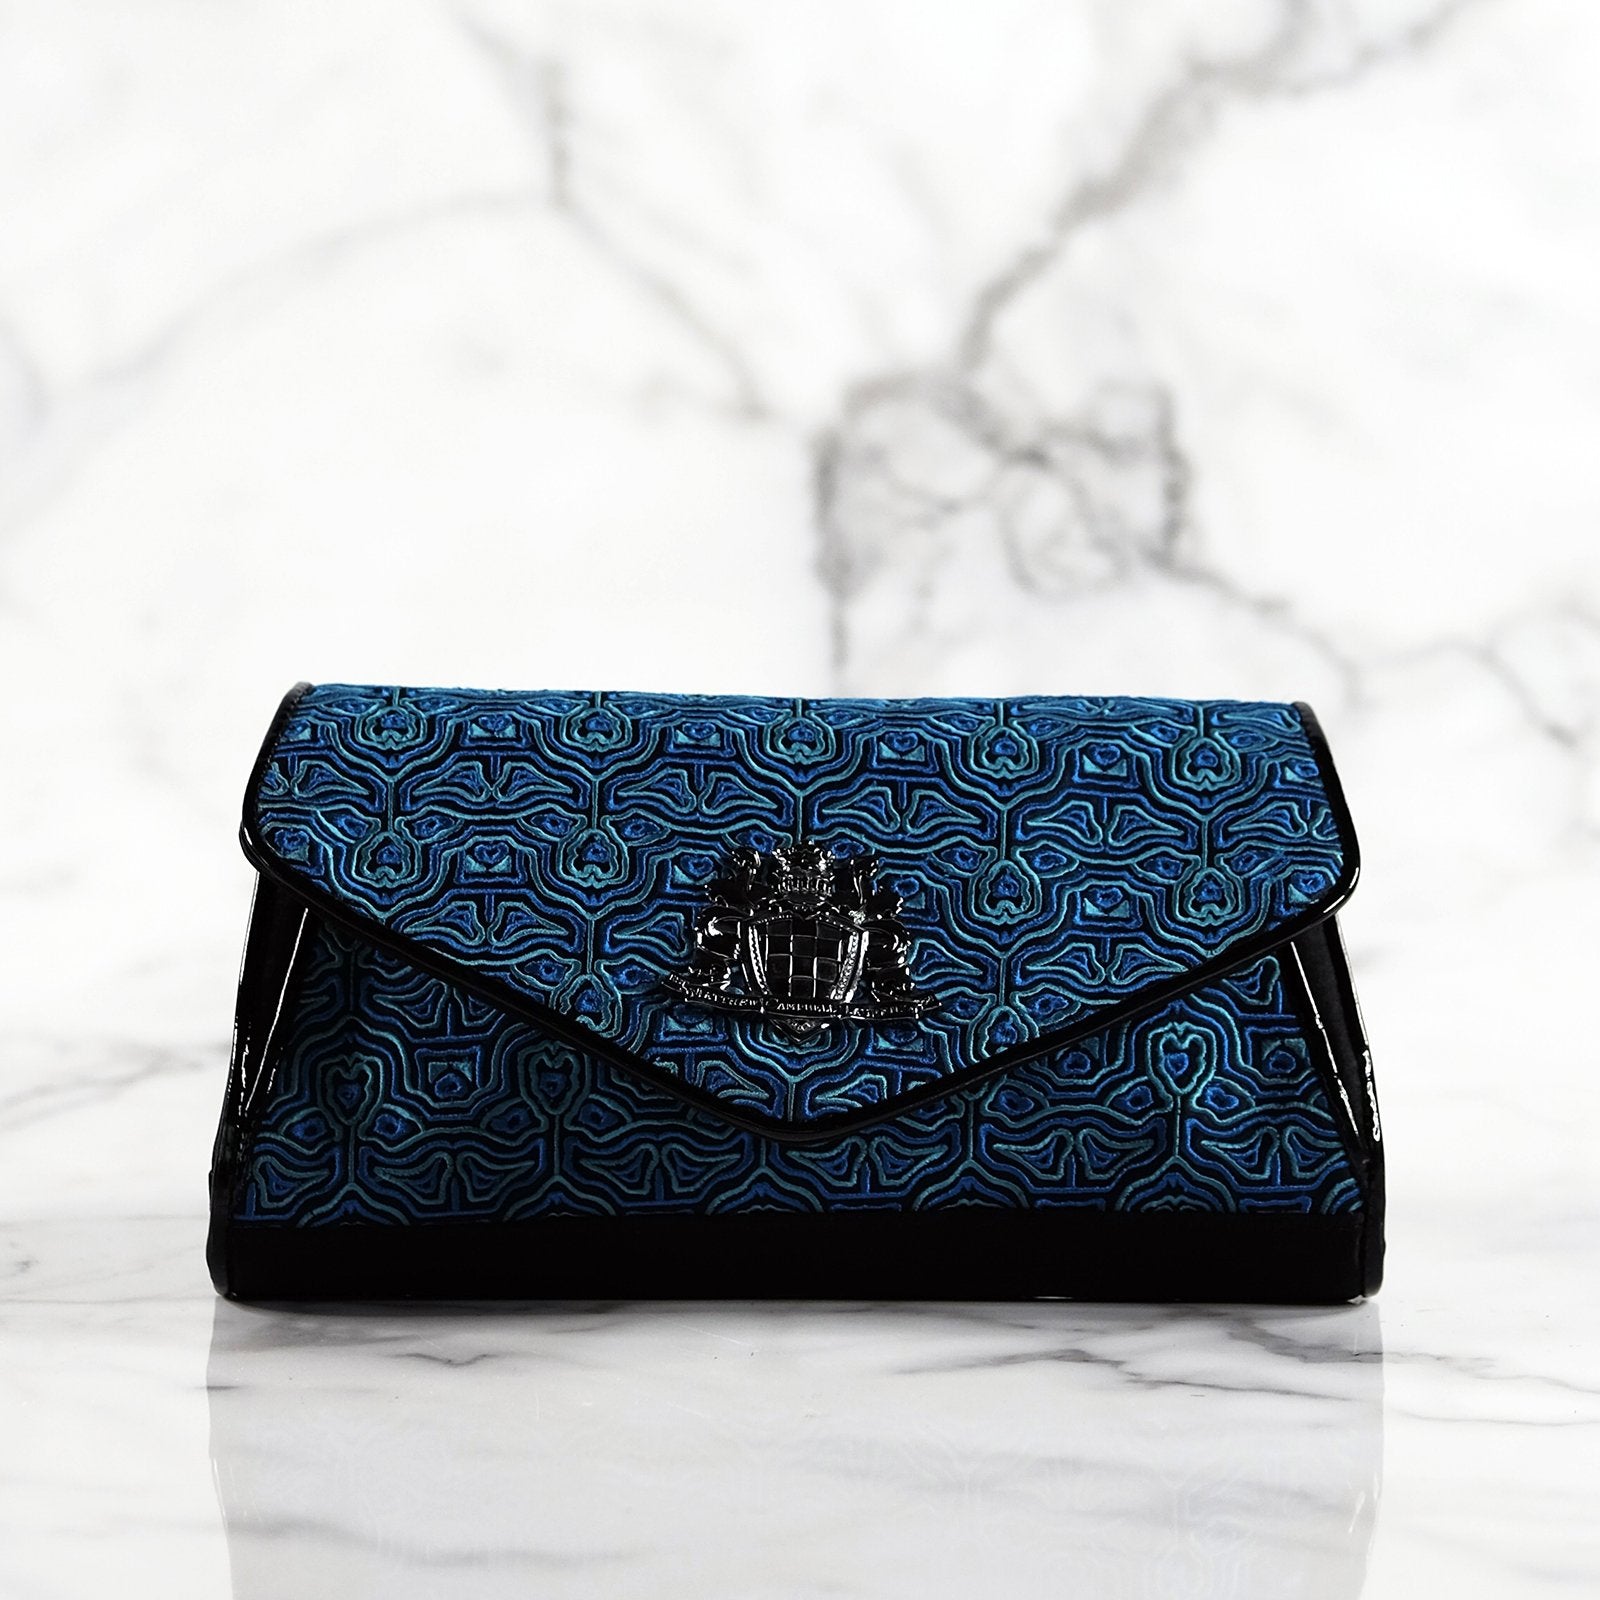 Tasja ocean blues and black embroidered satin and piped leather handbag with sequins